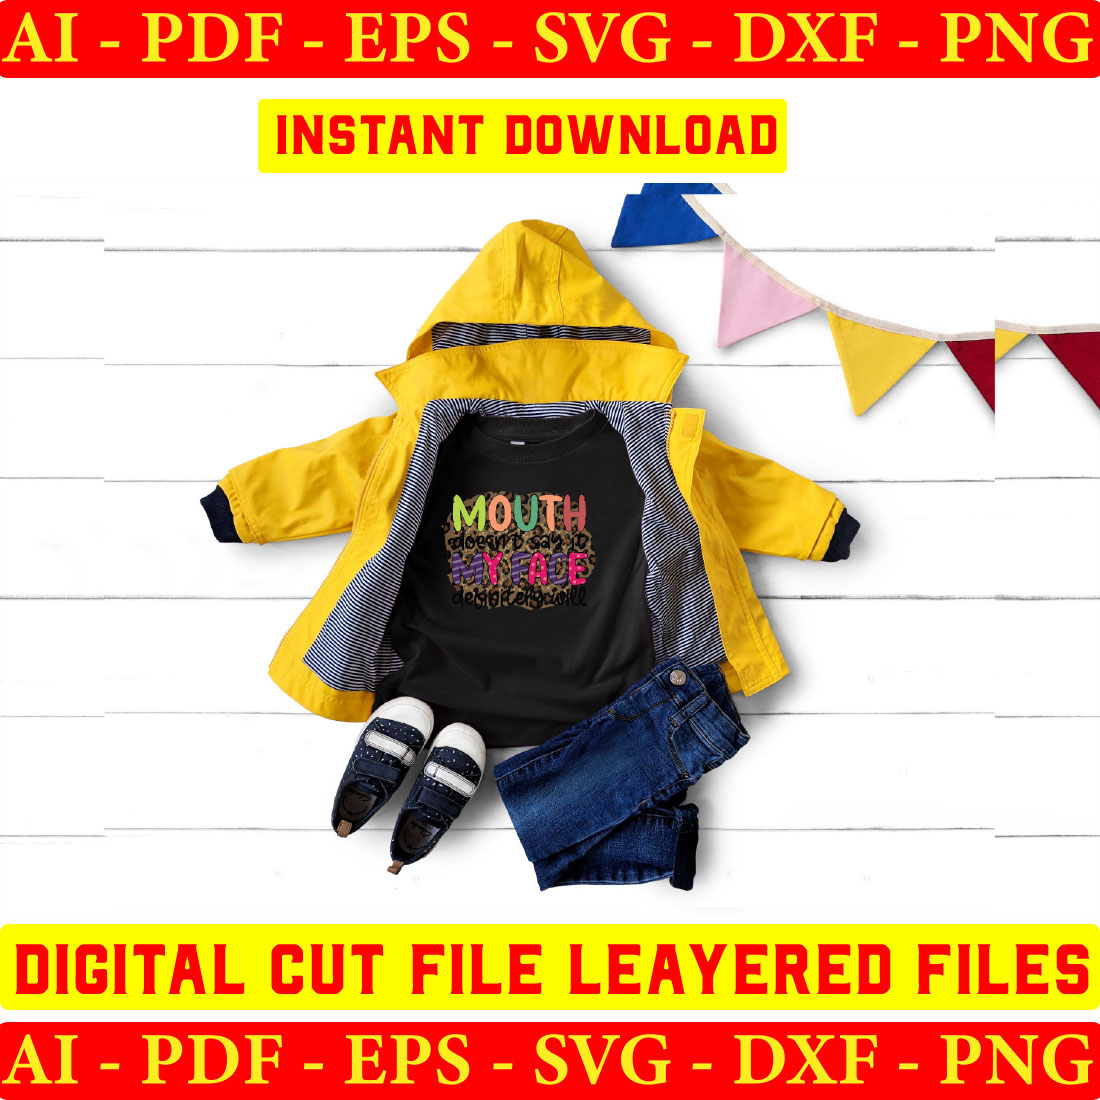 Child's yellow raincoat with a black shirt underneath it.